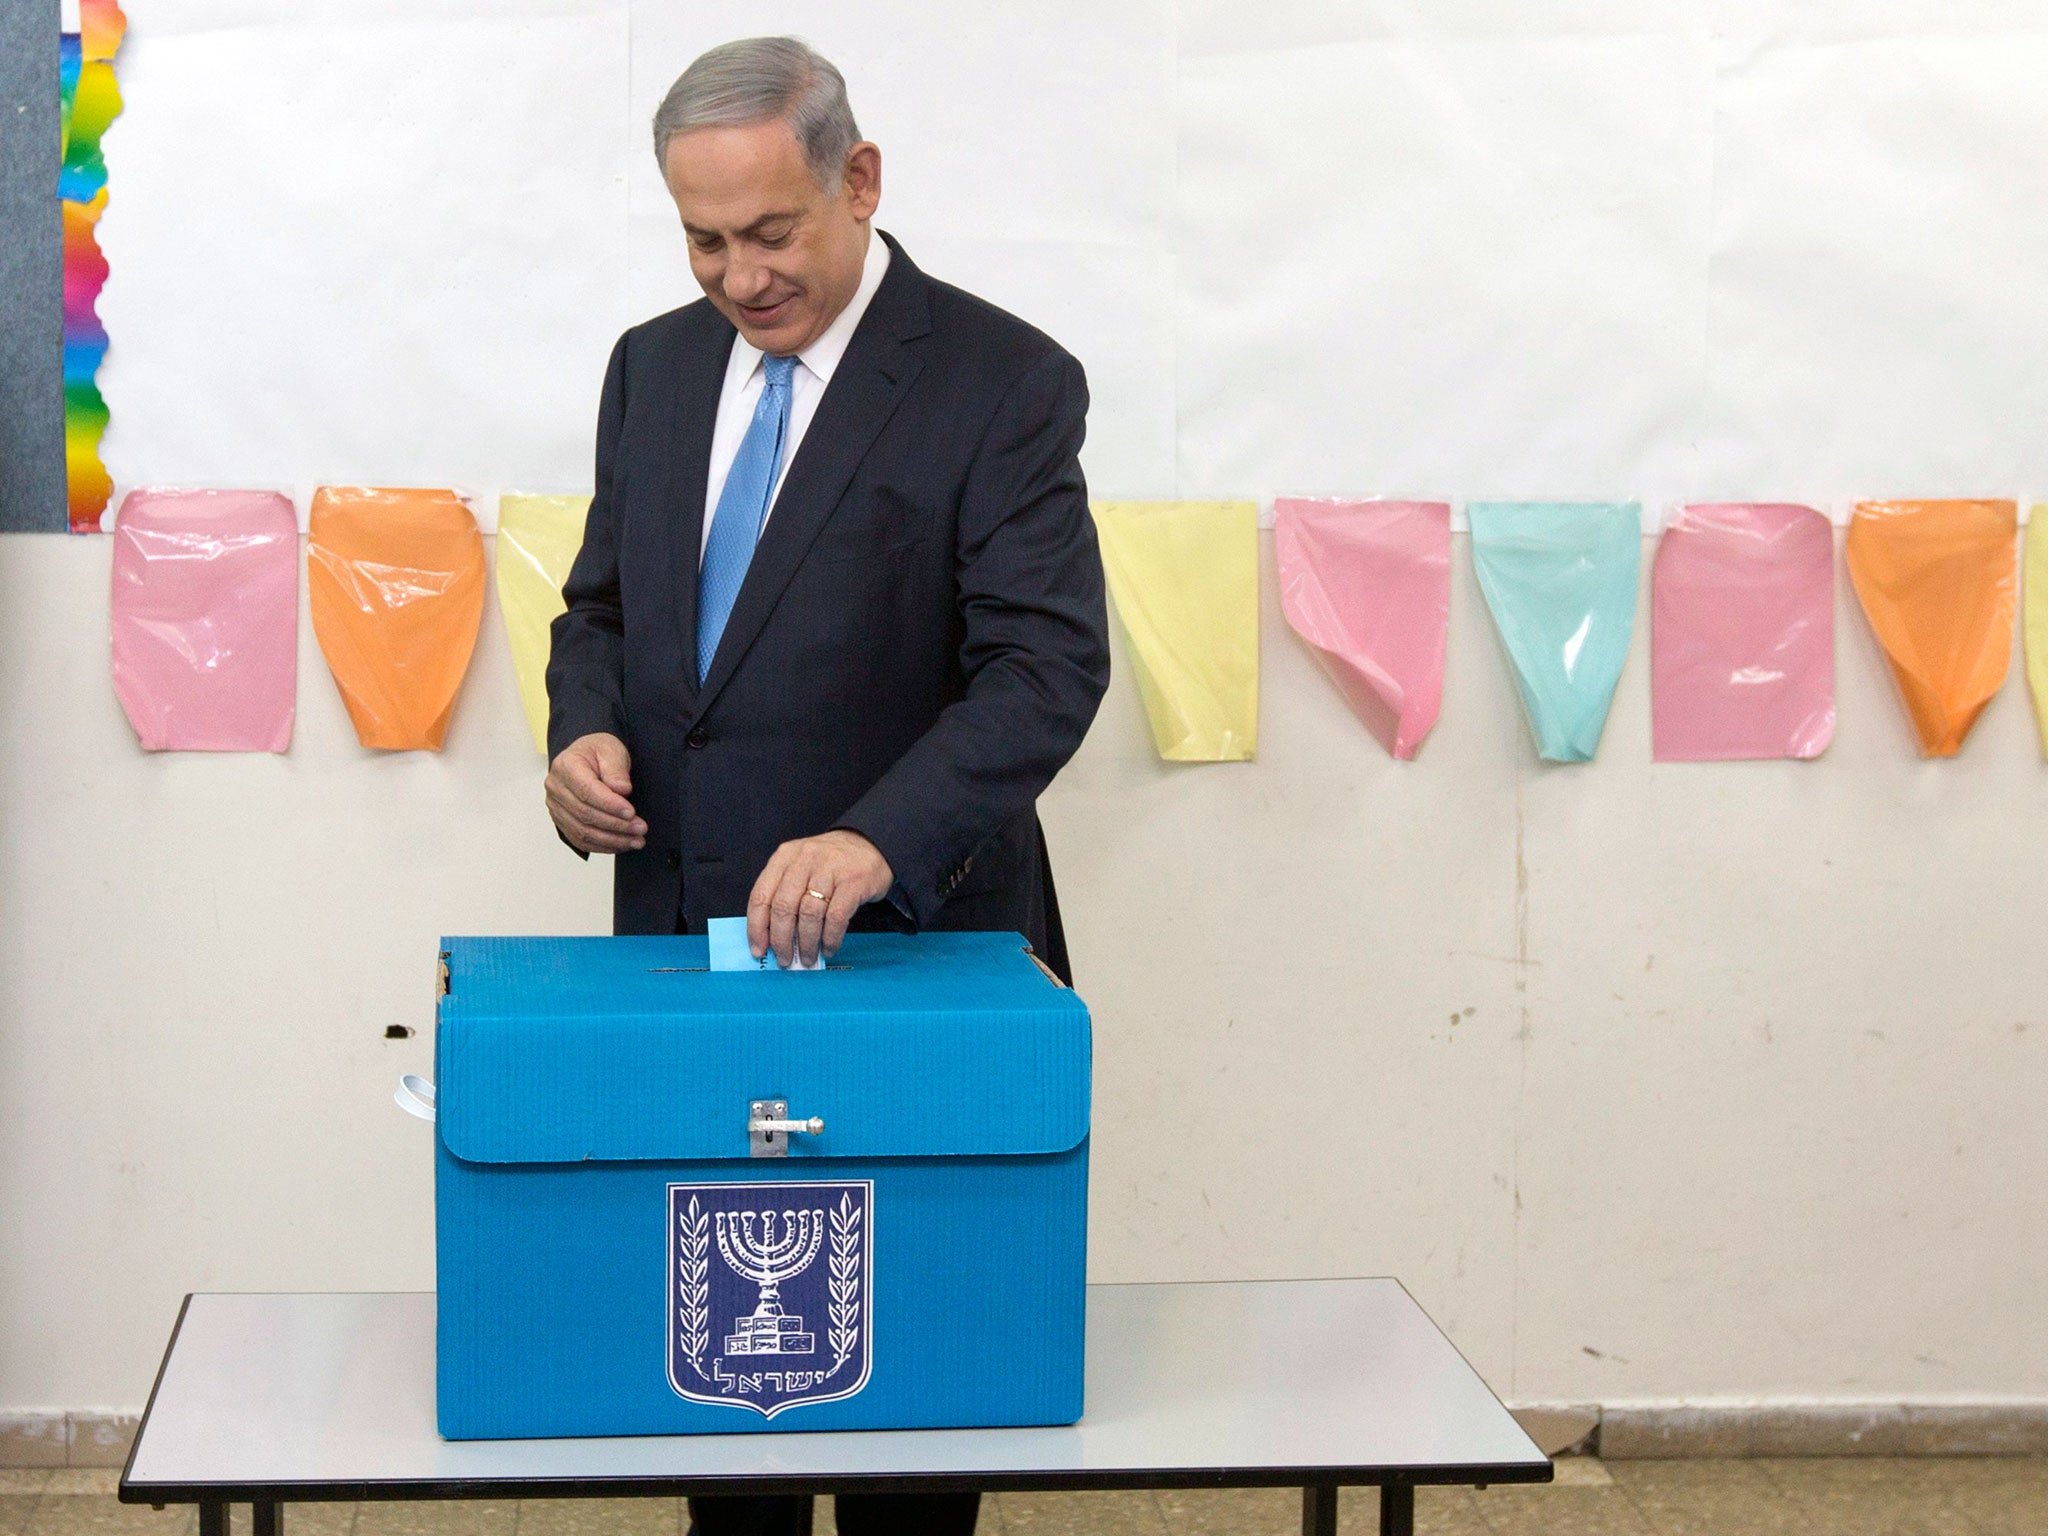 Israel's Prime Minister Benjamin Netanyahu casts his ballot for the parliamentary election at a polling station in Jerusalem